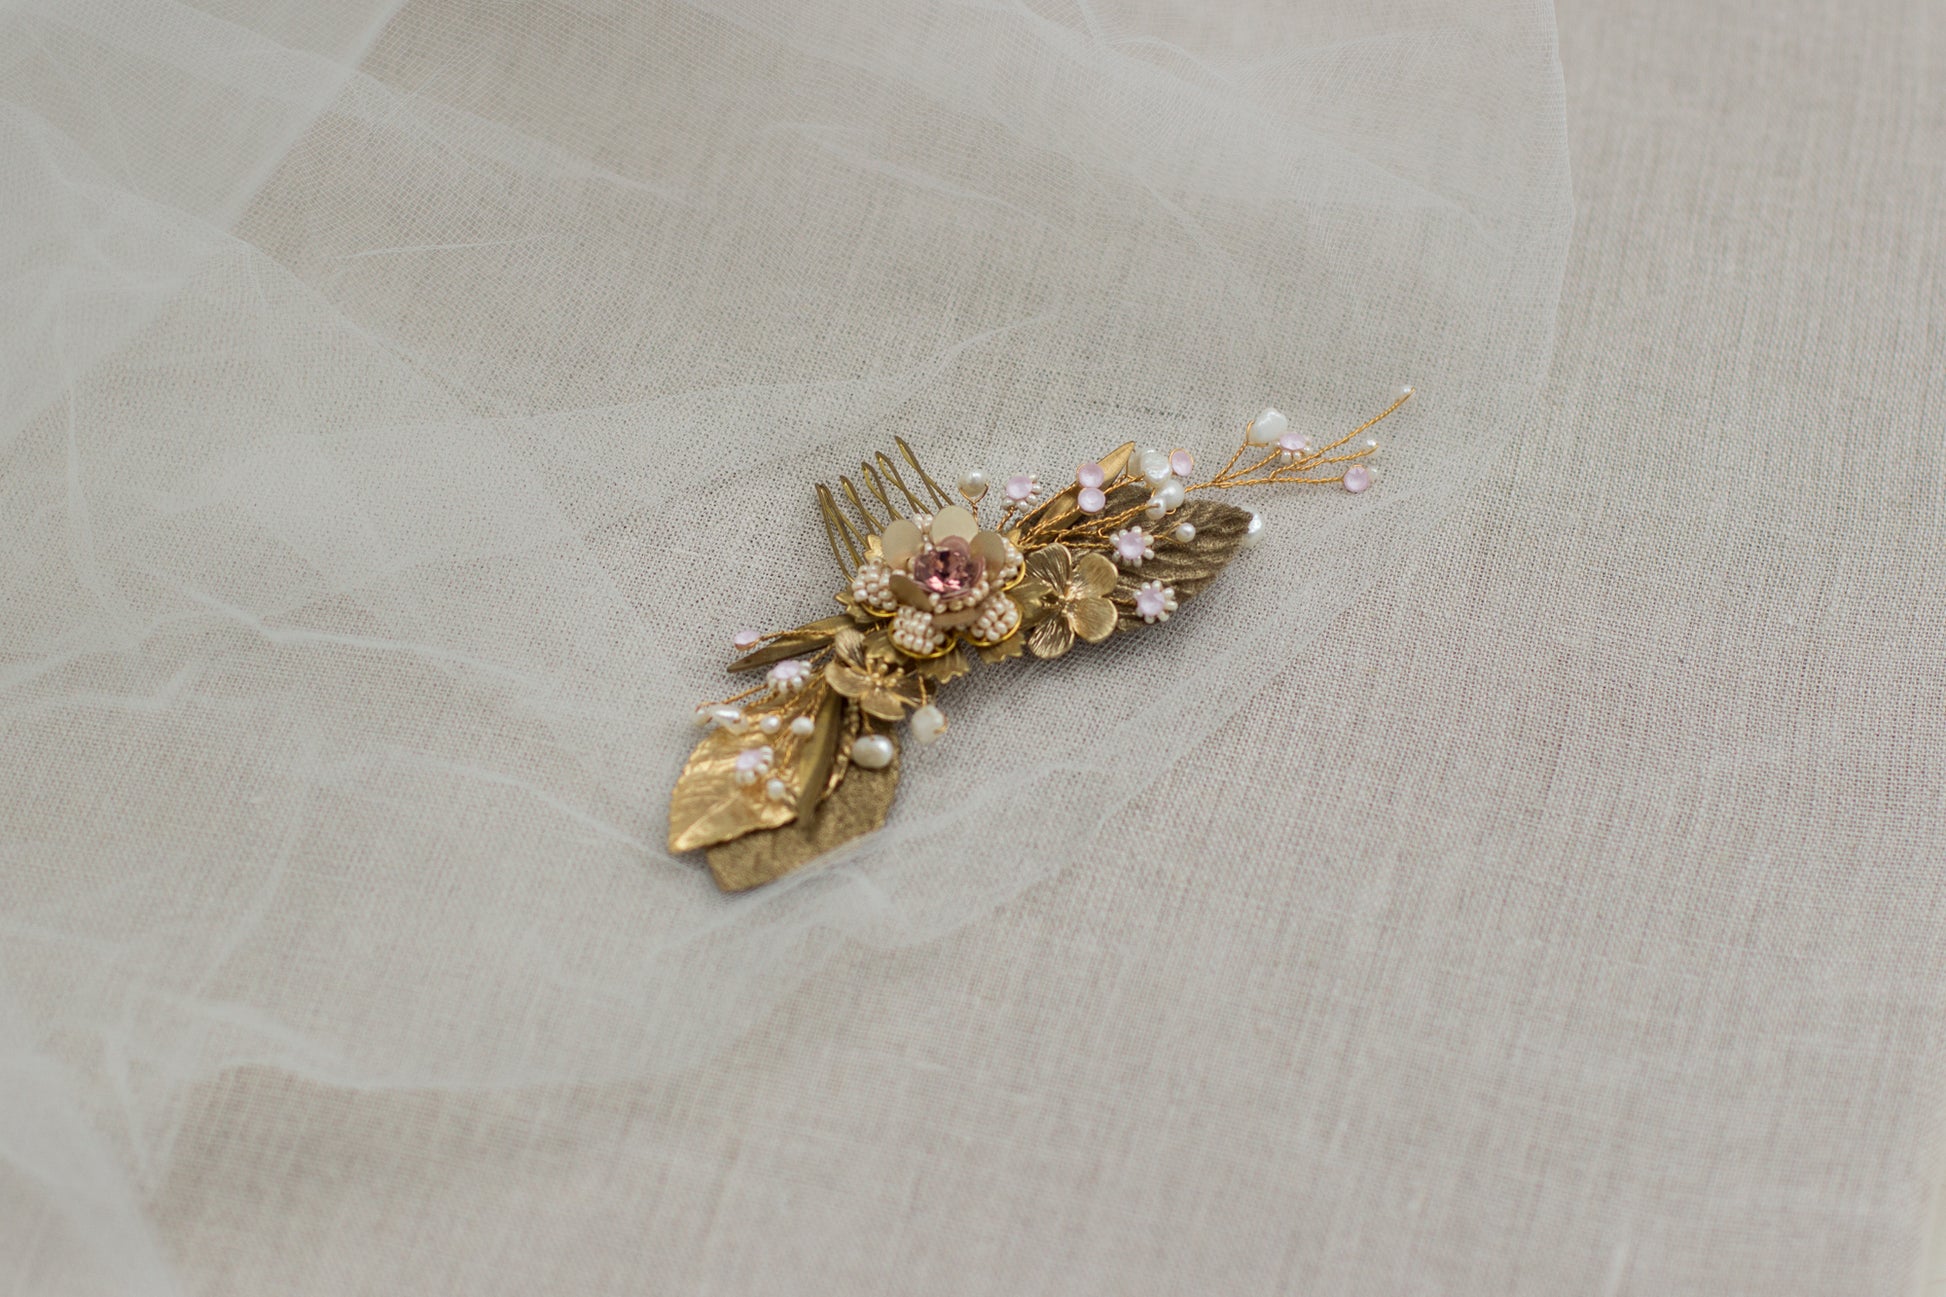 Bridal hair comb, Floral hairpiece, Gold hairpiece, Handmade Wedding hair accessories, Pearl Wedding headpiece, Gold fascinator, Wedding fascinator, Crystal hair comb, Gold hair comb,